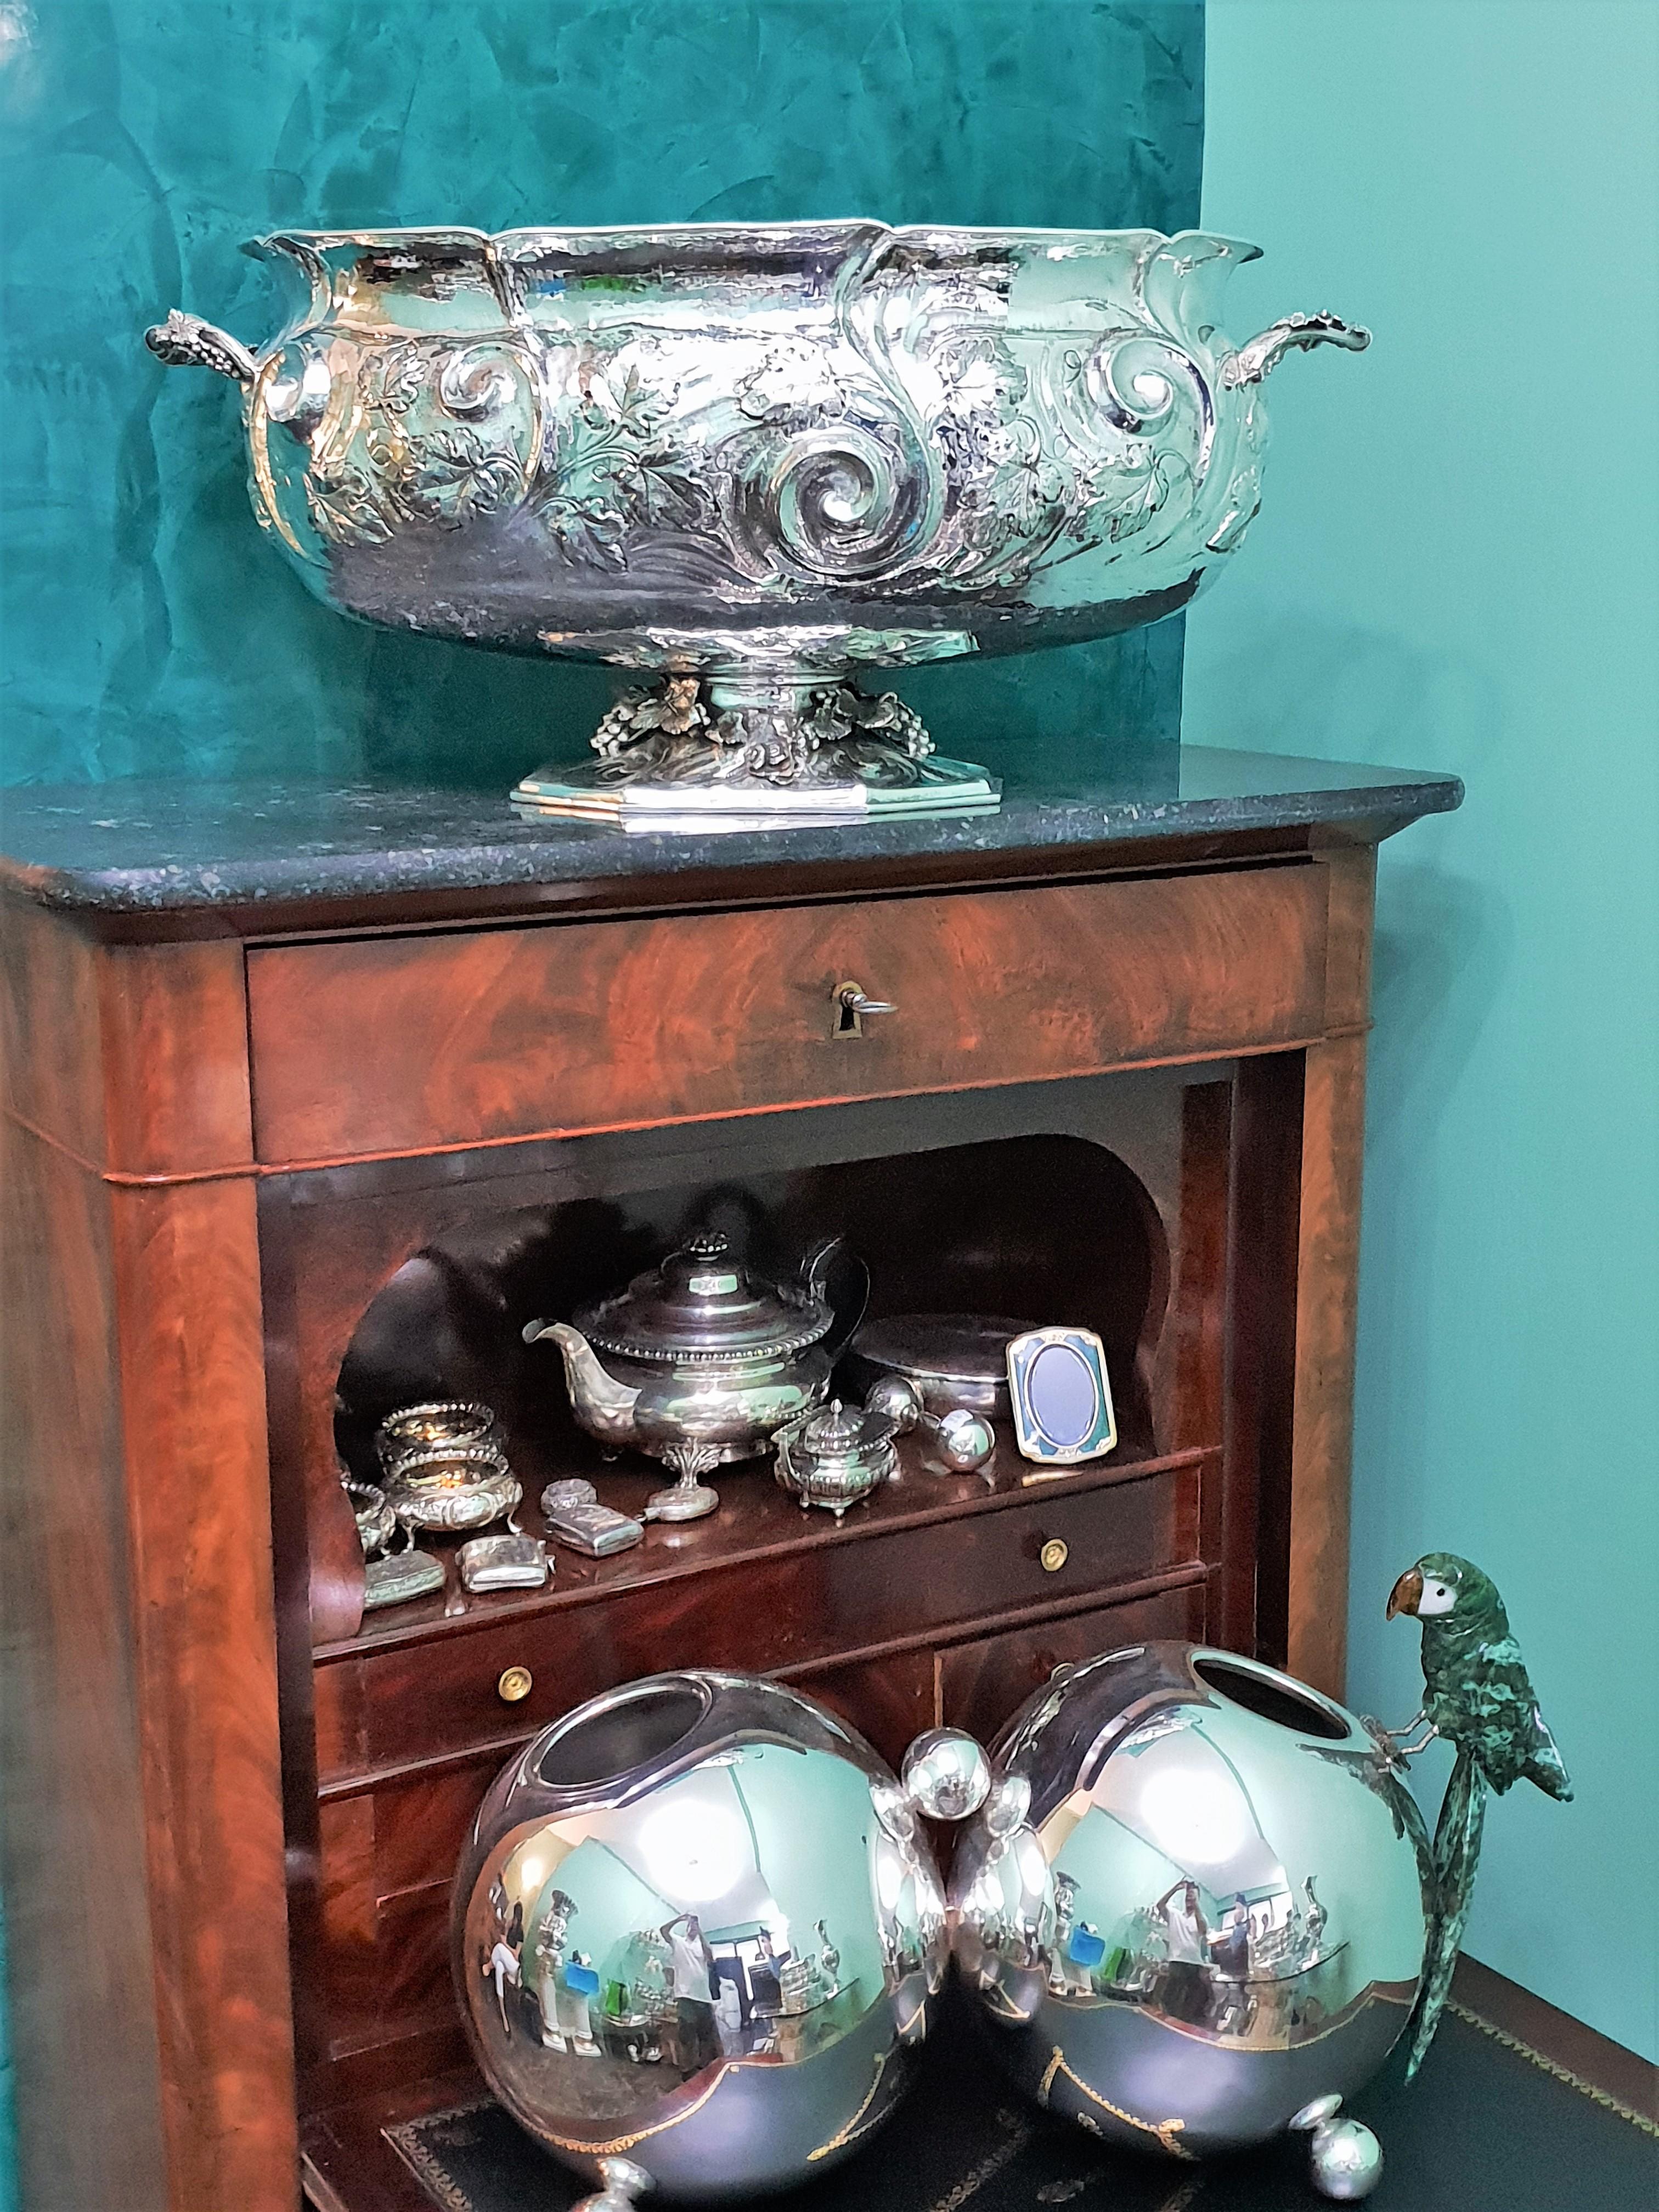 20th Century Fratelli Ponzone Rococo Engraved Silver Centerpiece, 1930s For Sale 9